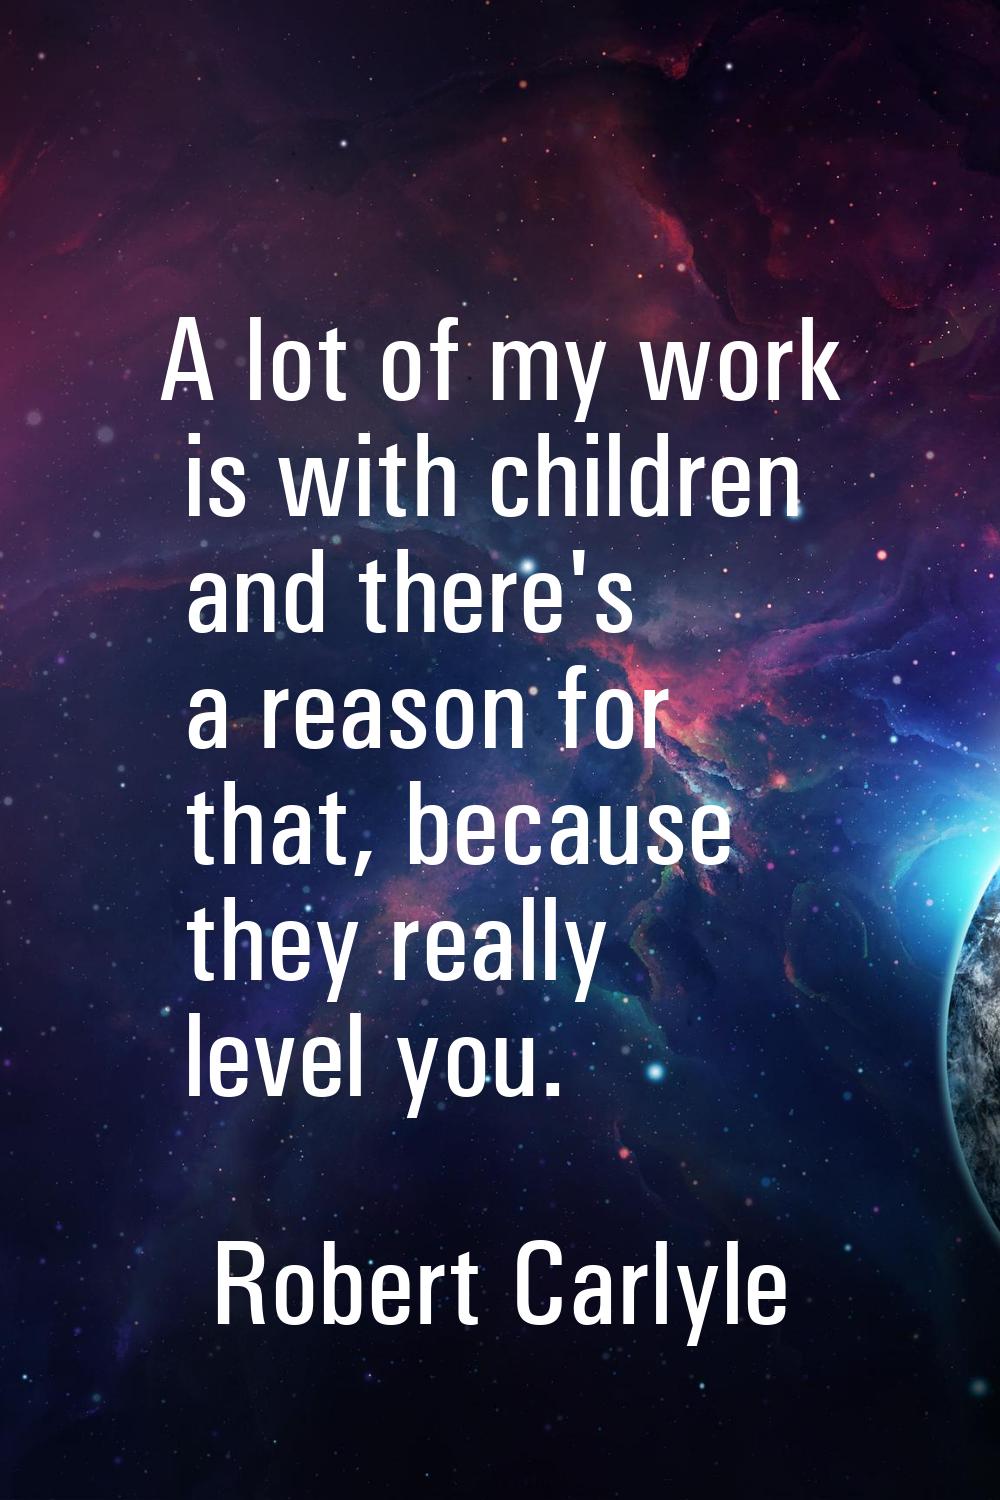 A lot of my work is with children and there's a reason for that, because they really level you.